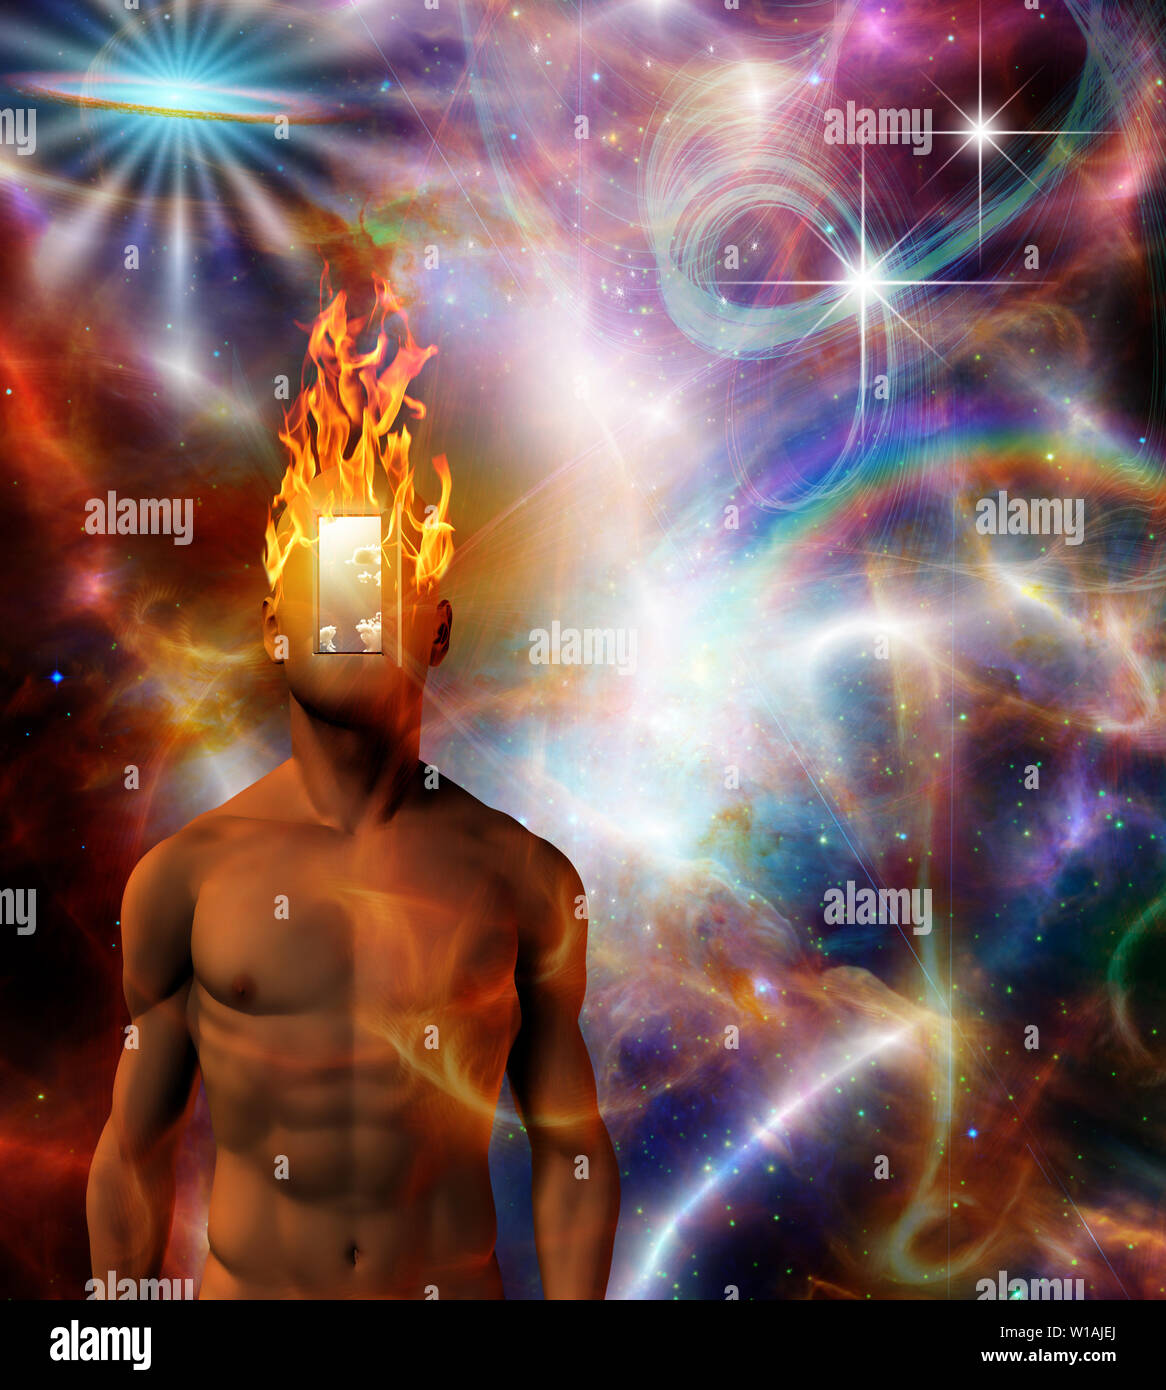 Surreal inspirational art. Burning mind in cosmic space Stock Photo